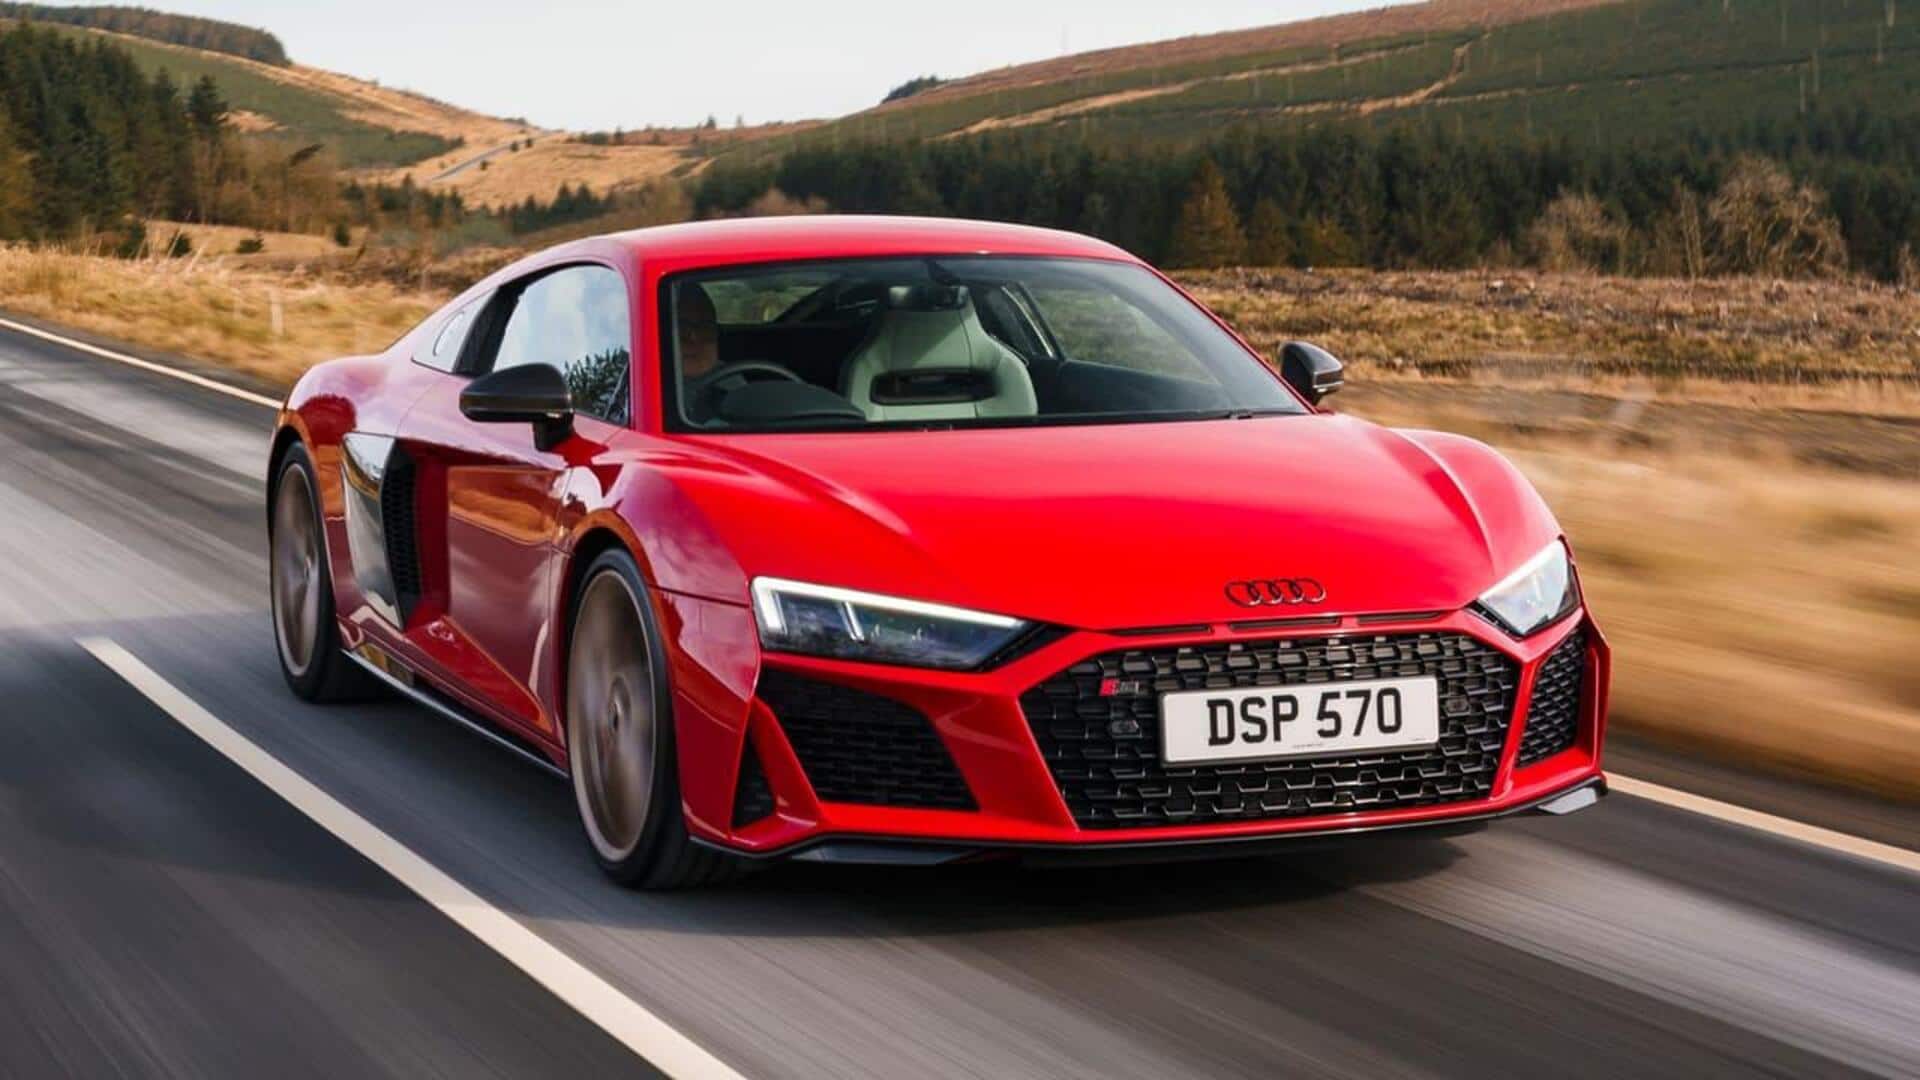 What's next for Audi after ending production of R8 supercar